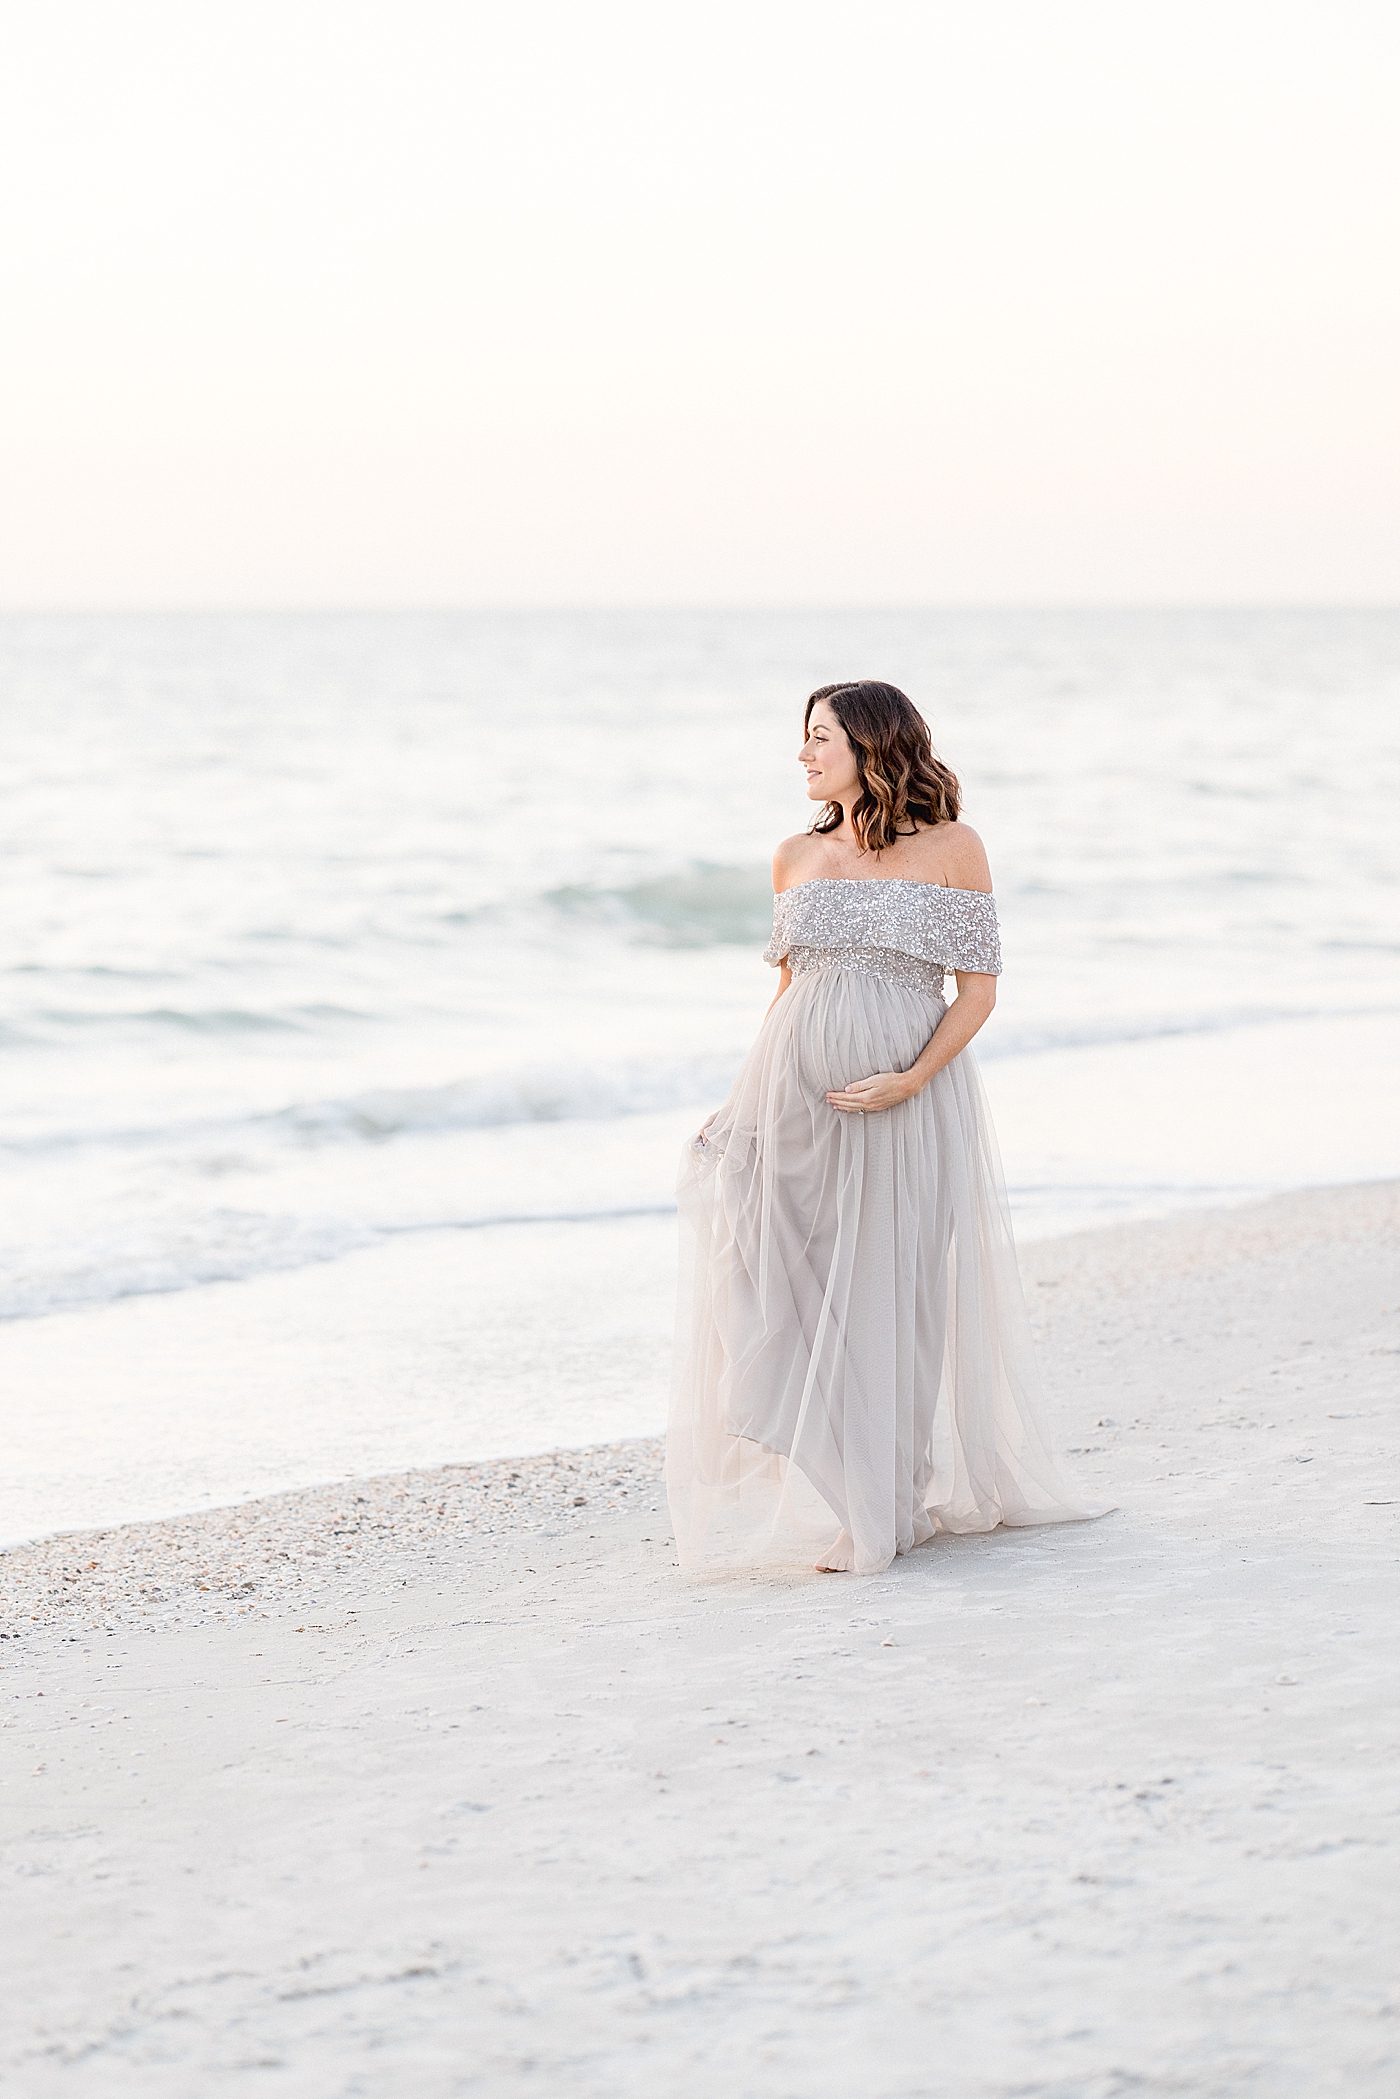 Expecting mom walking along the beach. Photo by Brittany Elise Photography.